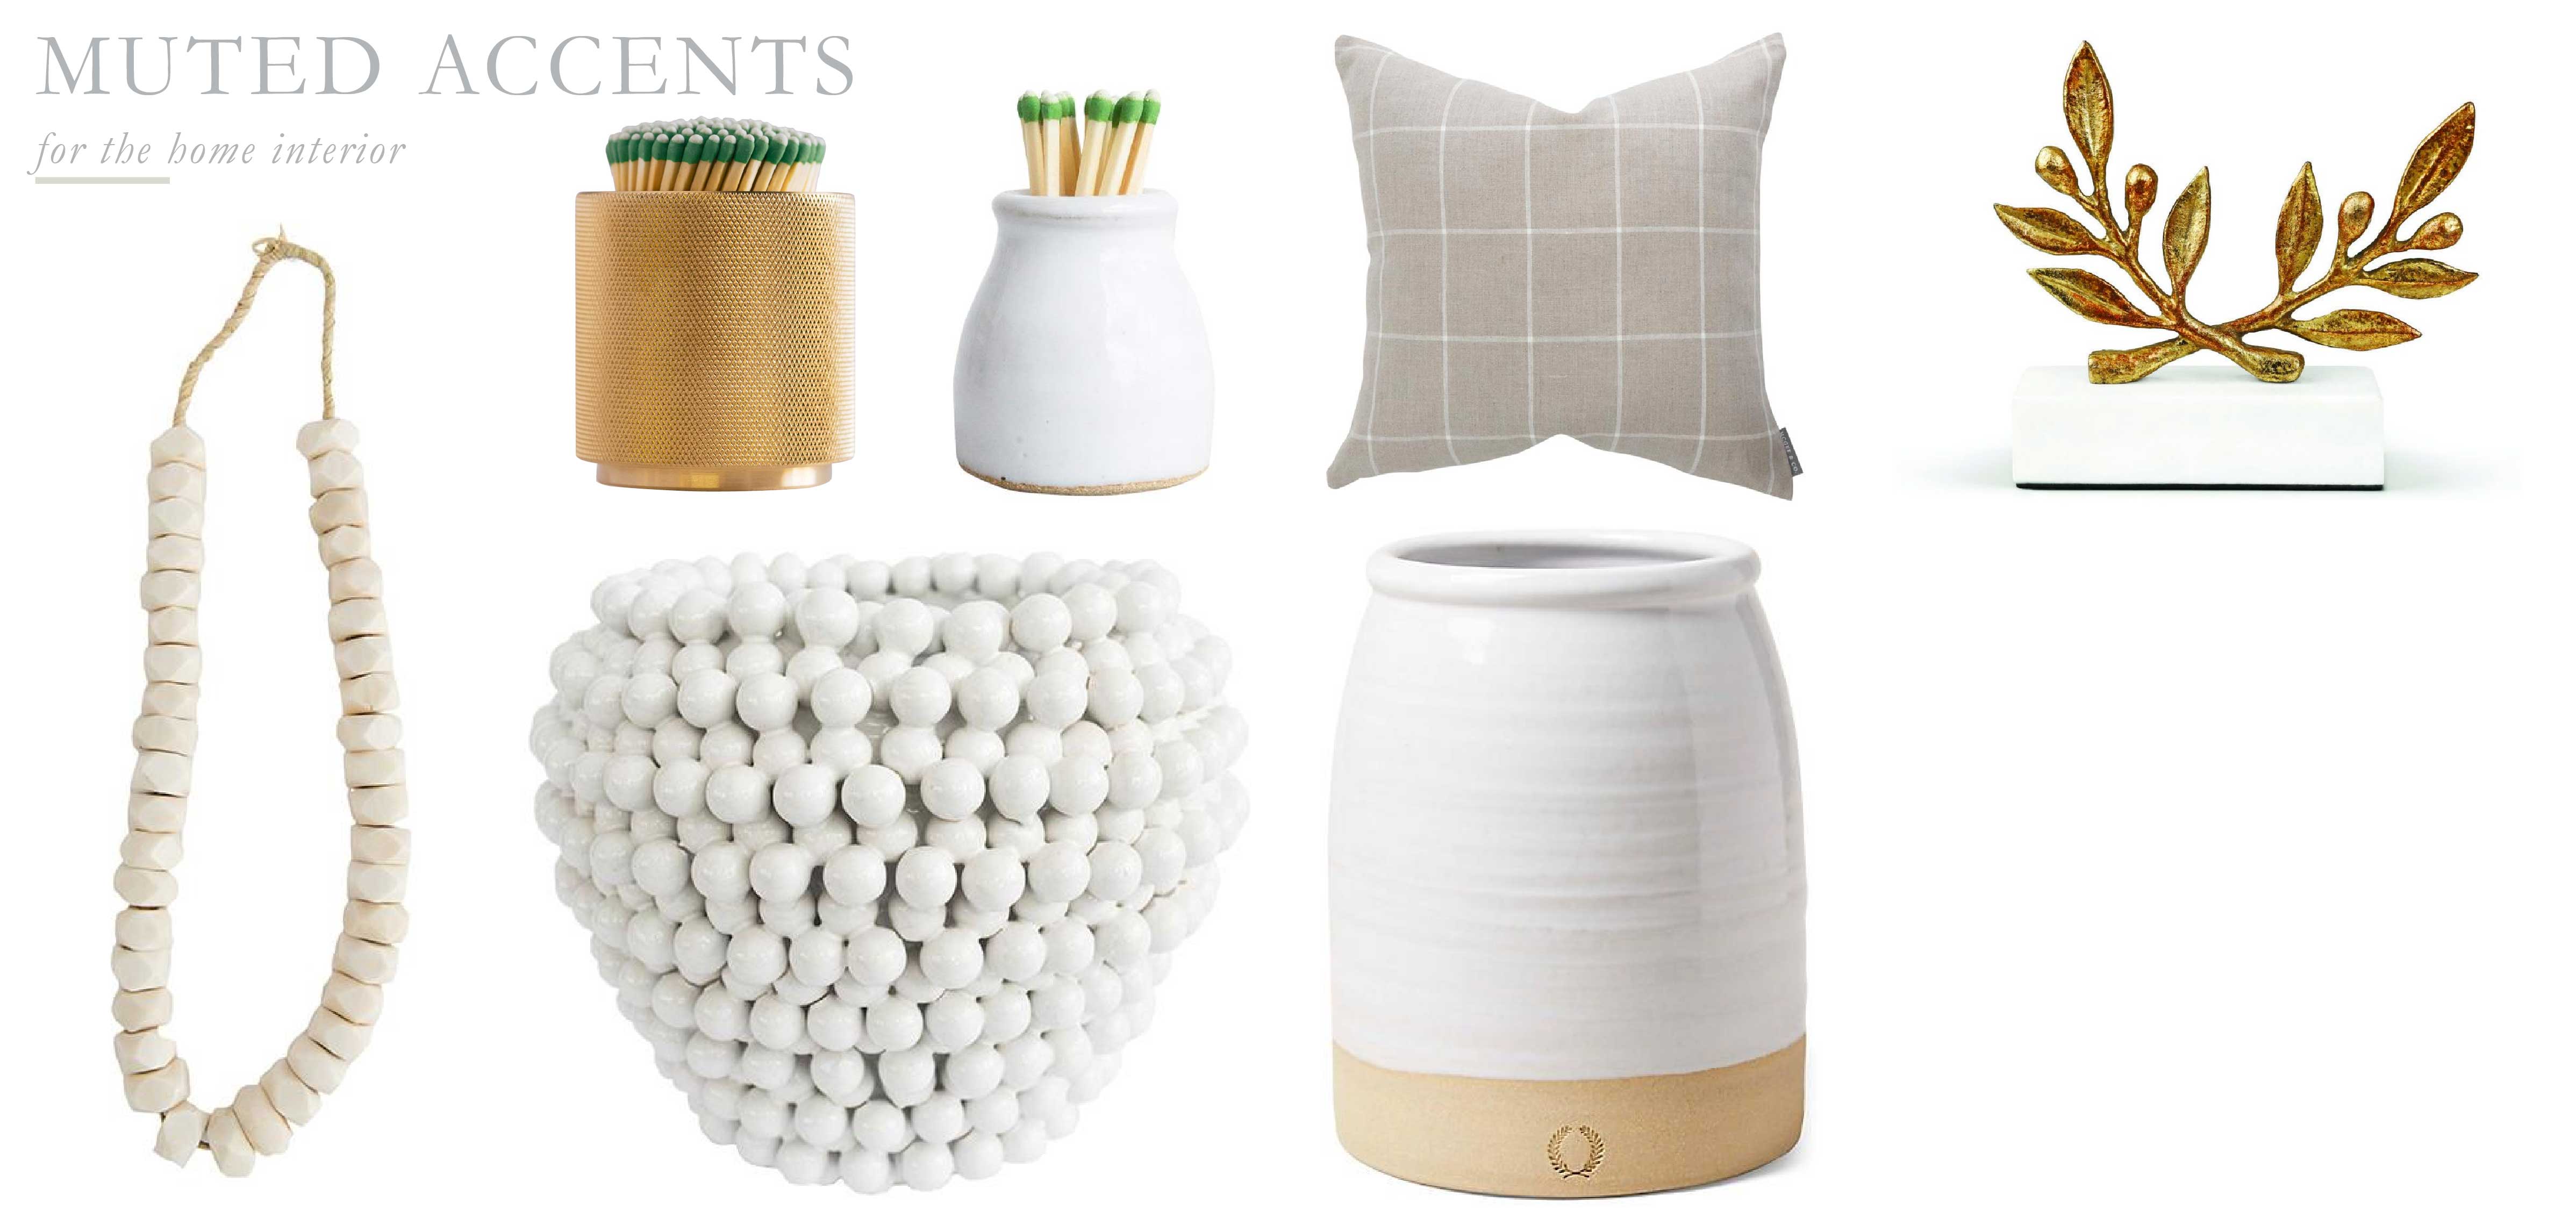 Styling Muted Home Accents - Monika Hibbs